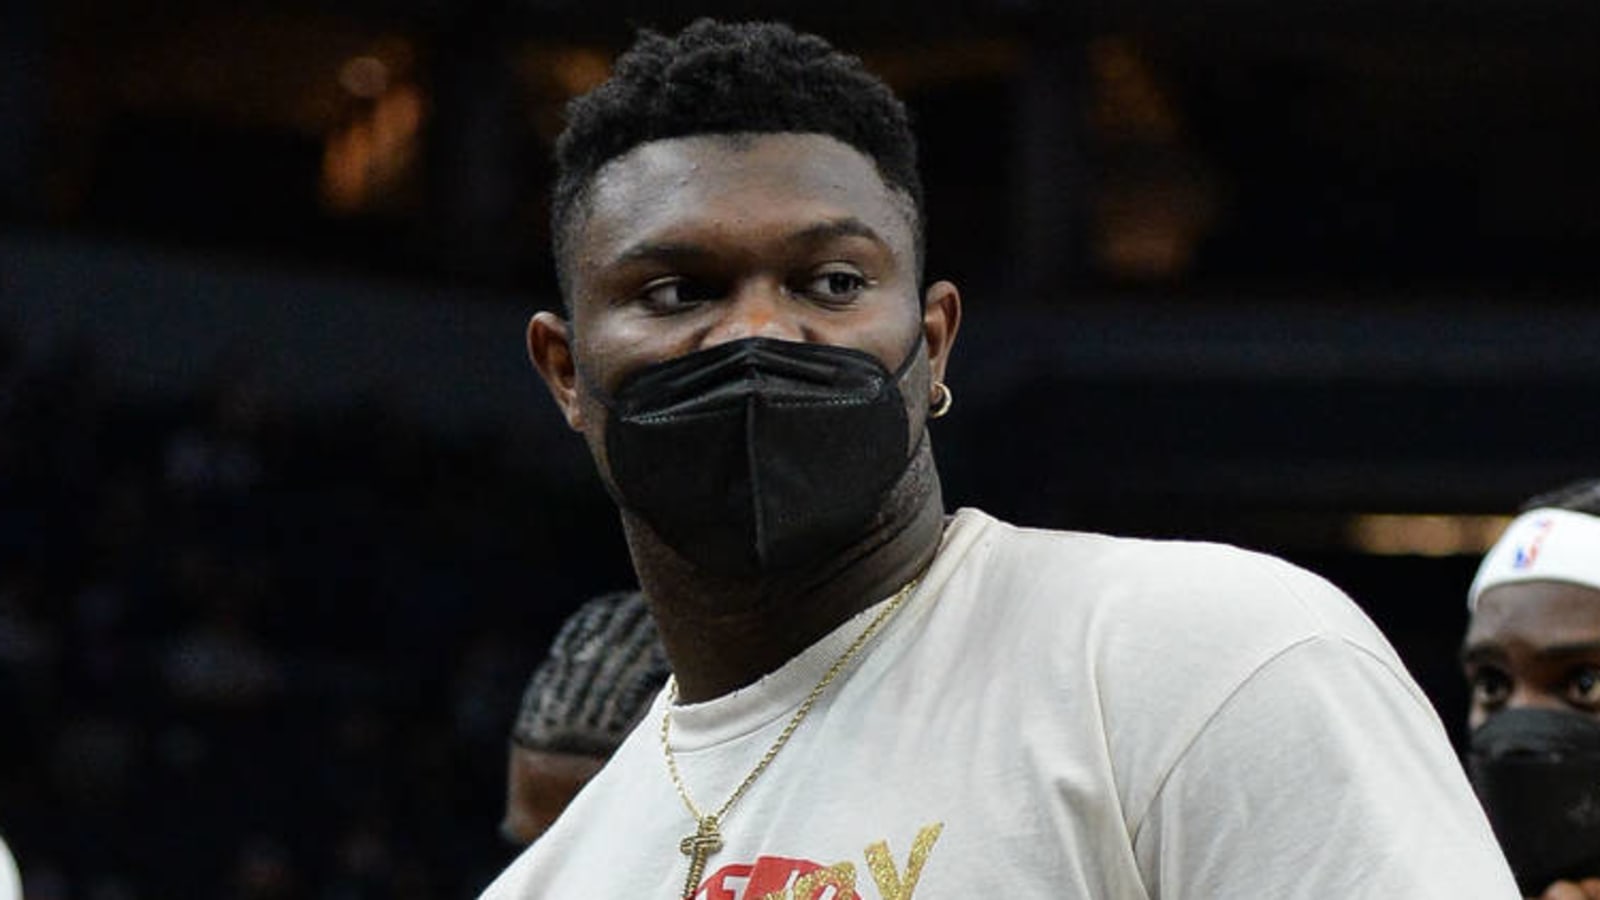 Pelicans' Zion Williamson to miss start of season after foot surgery